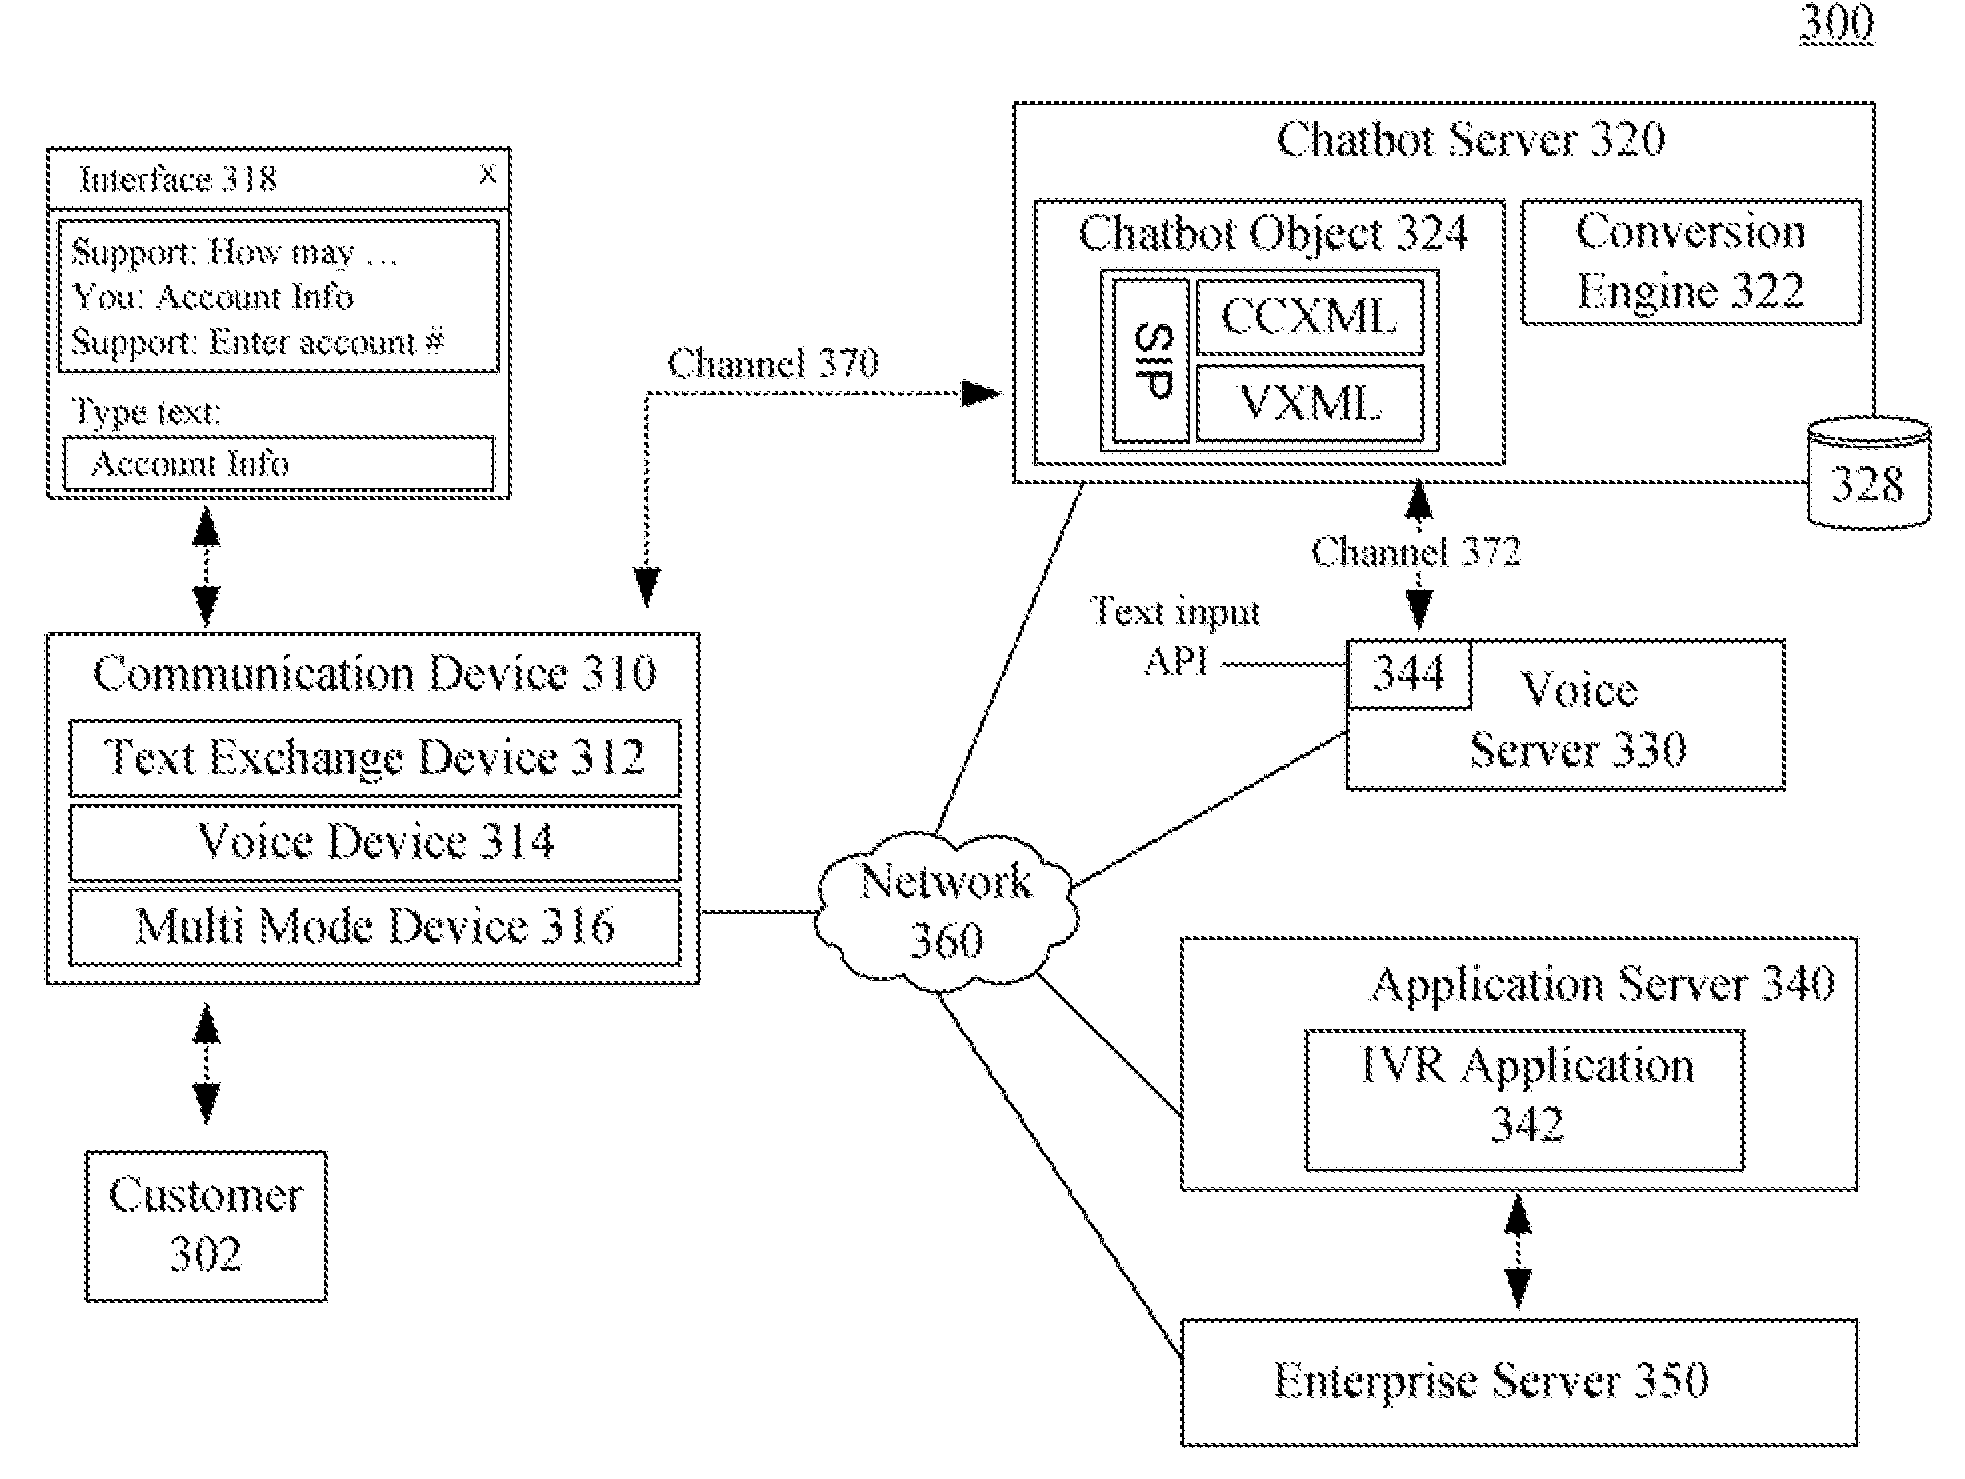 Using an automated speech application environment to automatically provide text exchange services